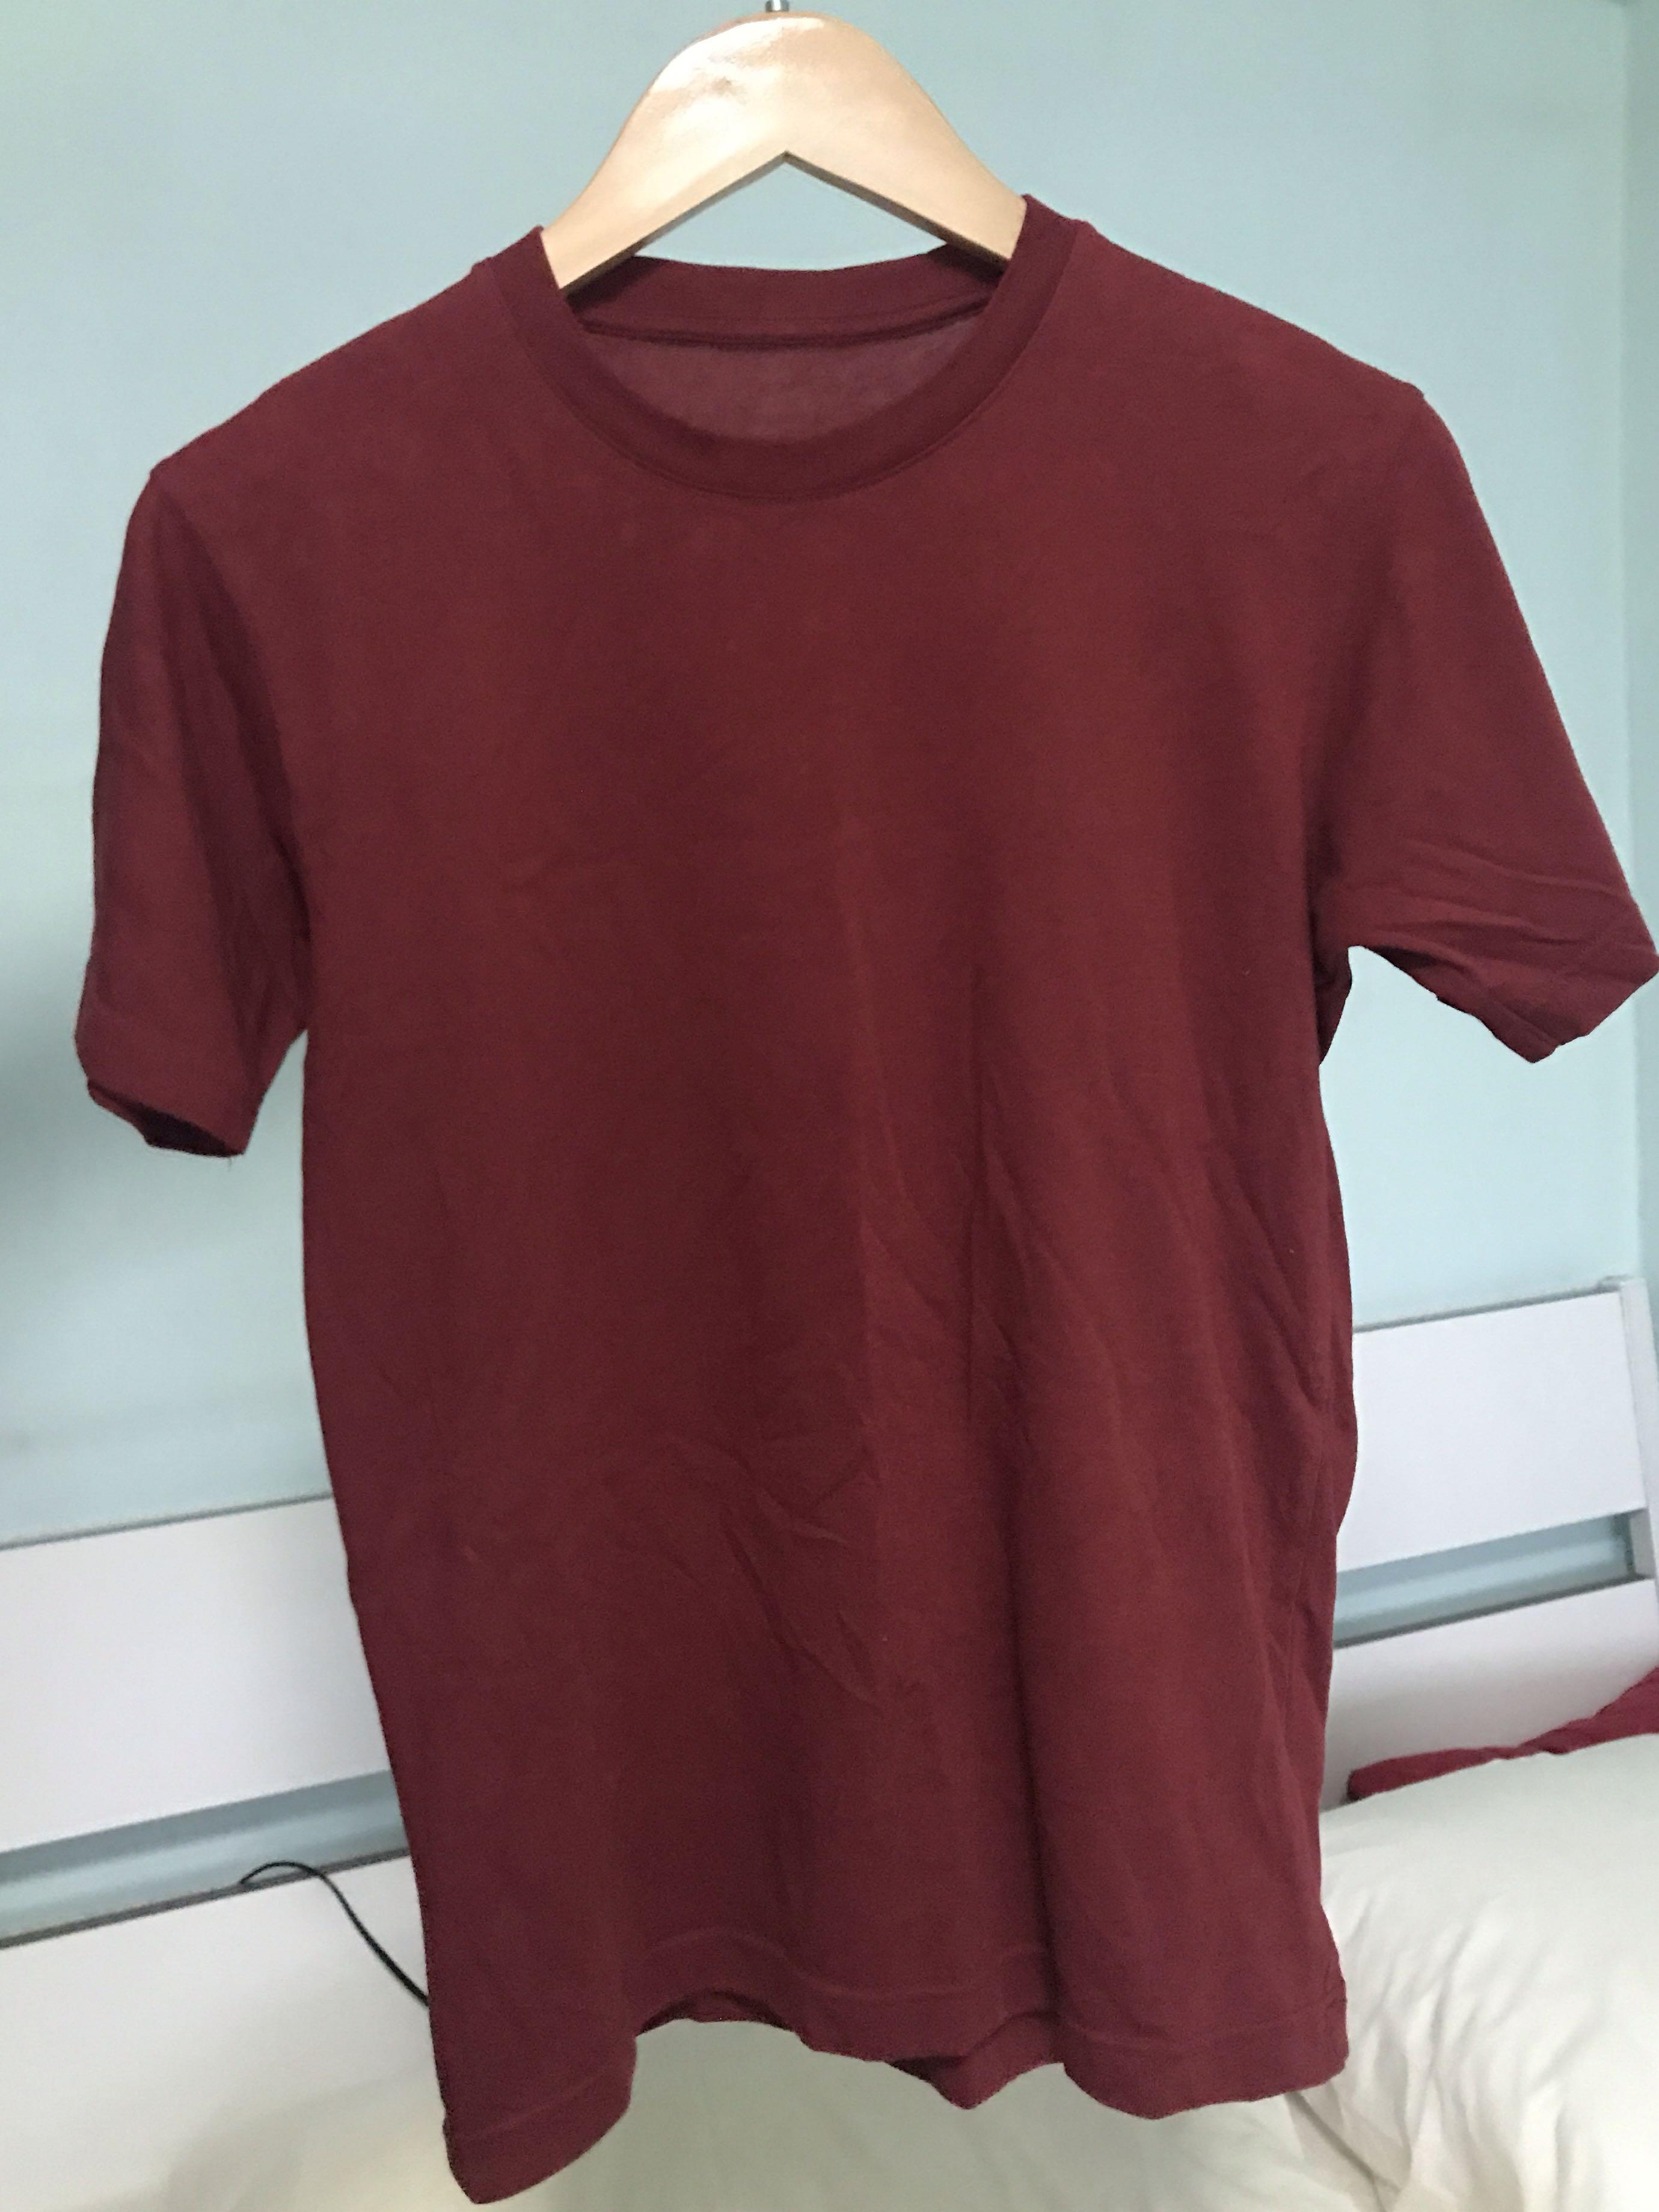 Uniqlo Plain Red T-Shirt, Women's Fashion, Clothes, Tops on Carousell